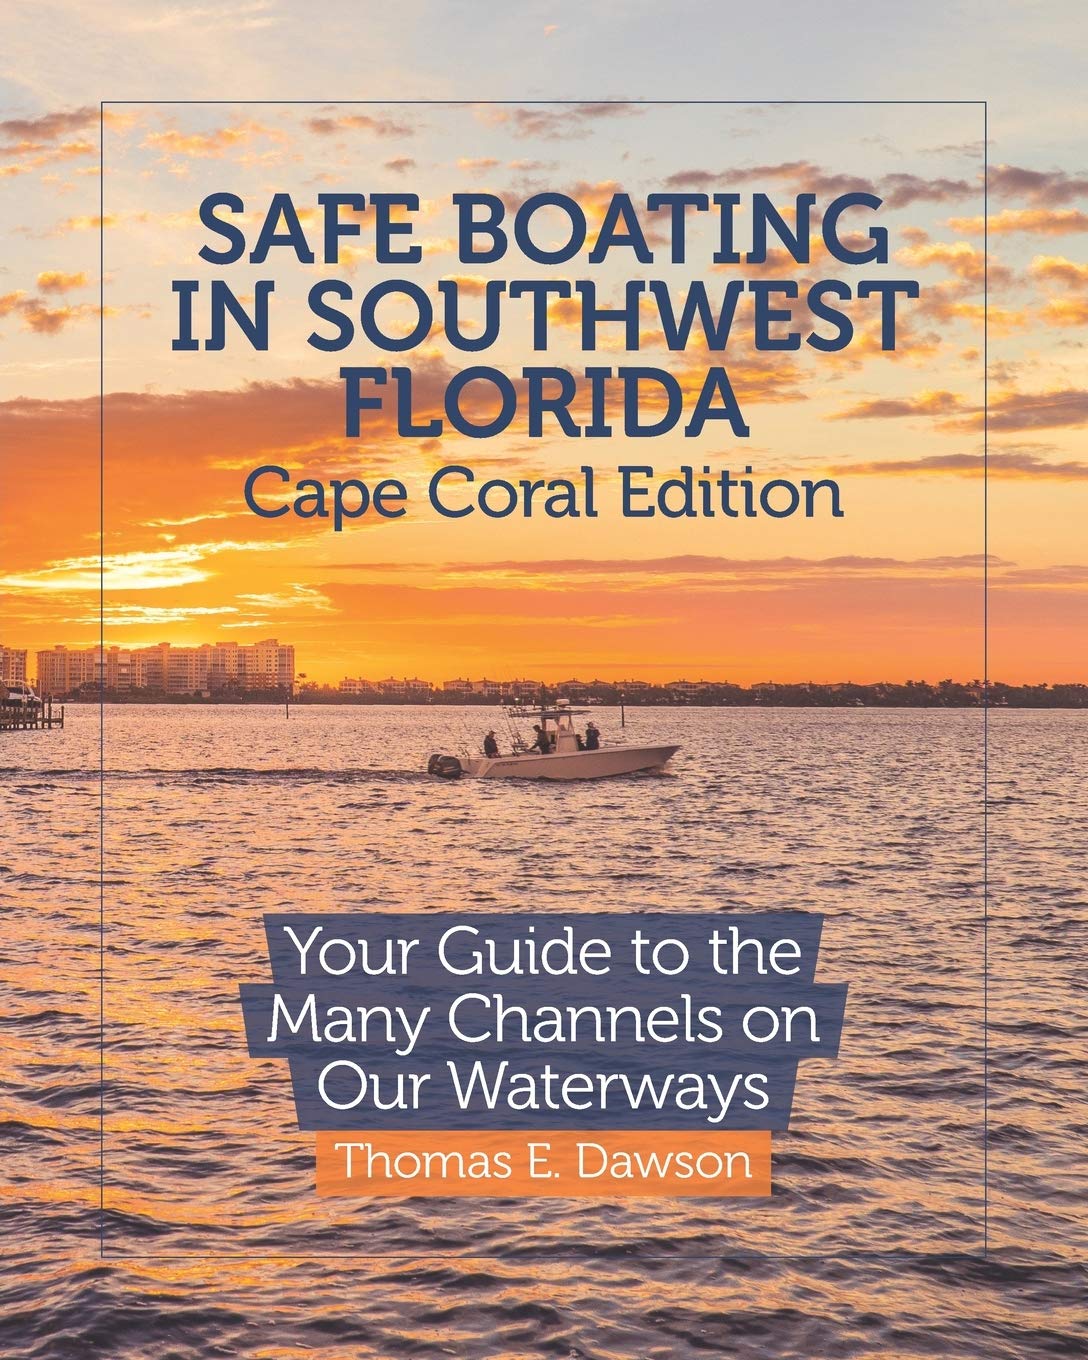 Safe Boating in Southwest Florida: Cape Coral Edition: Your Guide to the Many Channels on Our Waterways